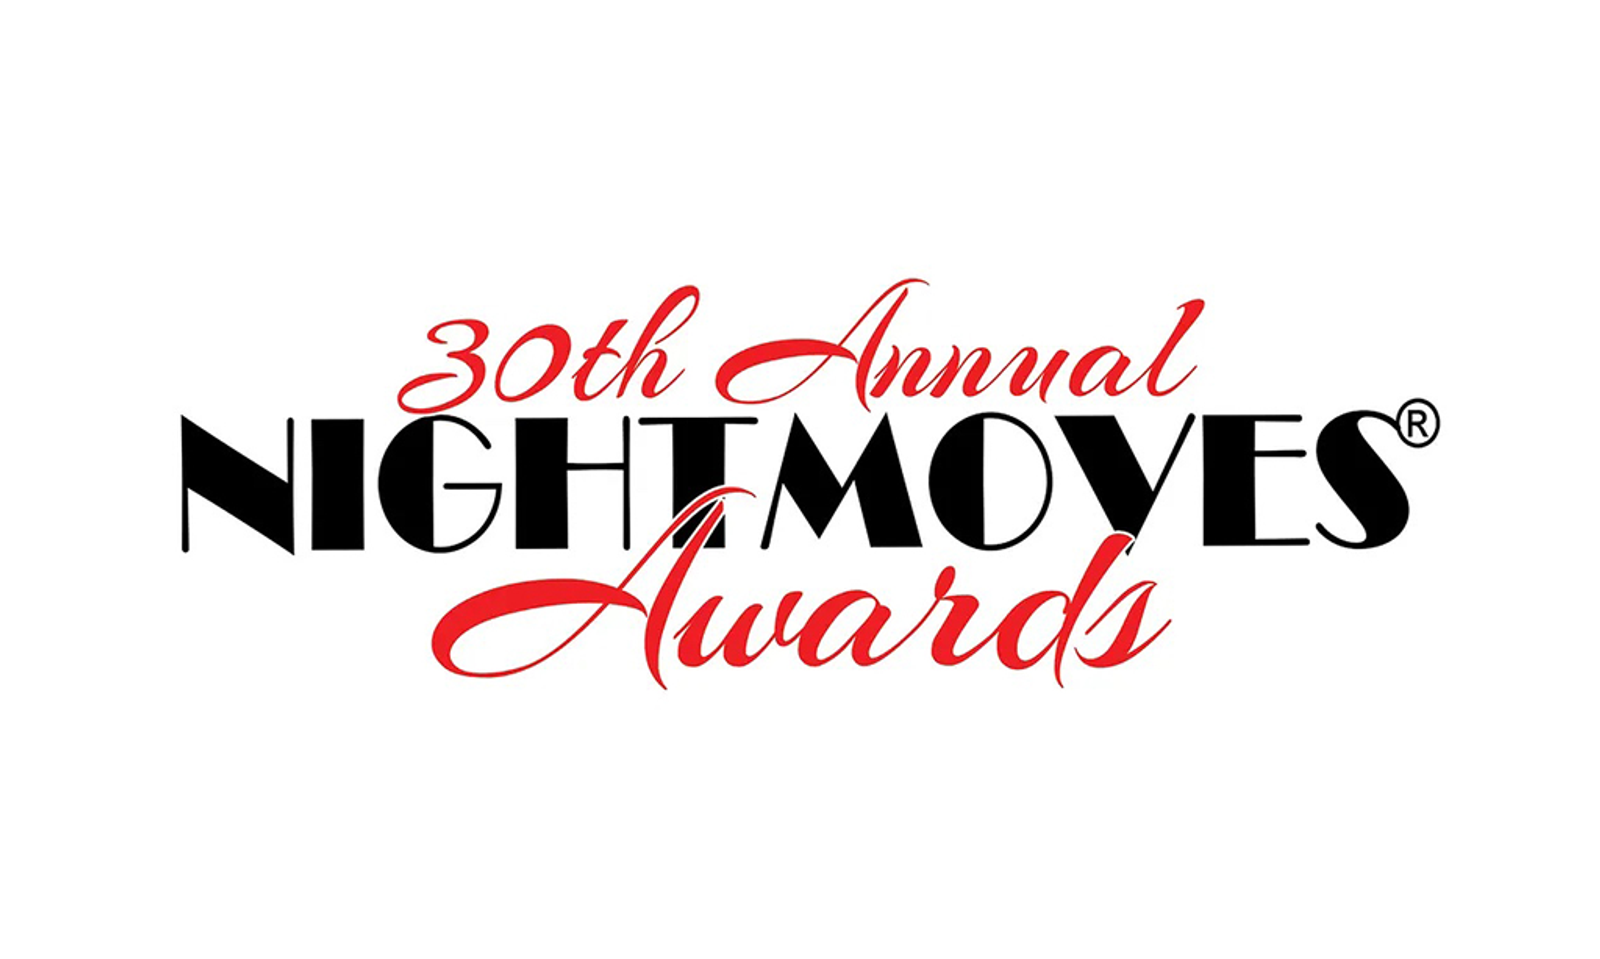 Voting Ends for the 30th Annual NightMoves Awards